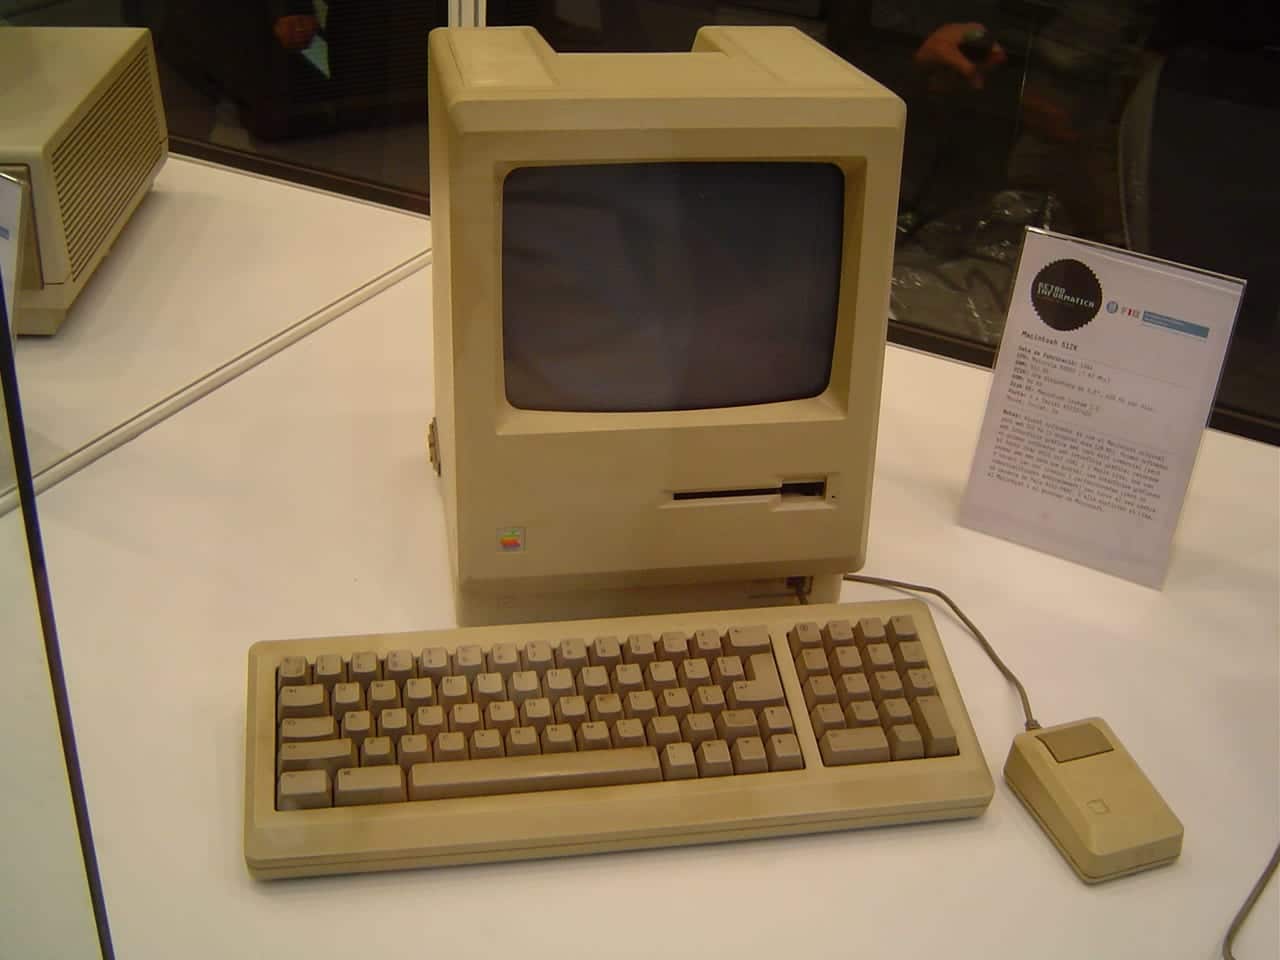 thechophouse:  Who else is part of the old computer fandom?  aHHHH, whatta beaut  Come to papa  Ugh  Such a perfect shapes  I BLAME FALLOUT FOR MAKING ME LIKE OLD SHIT